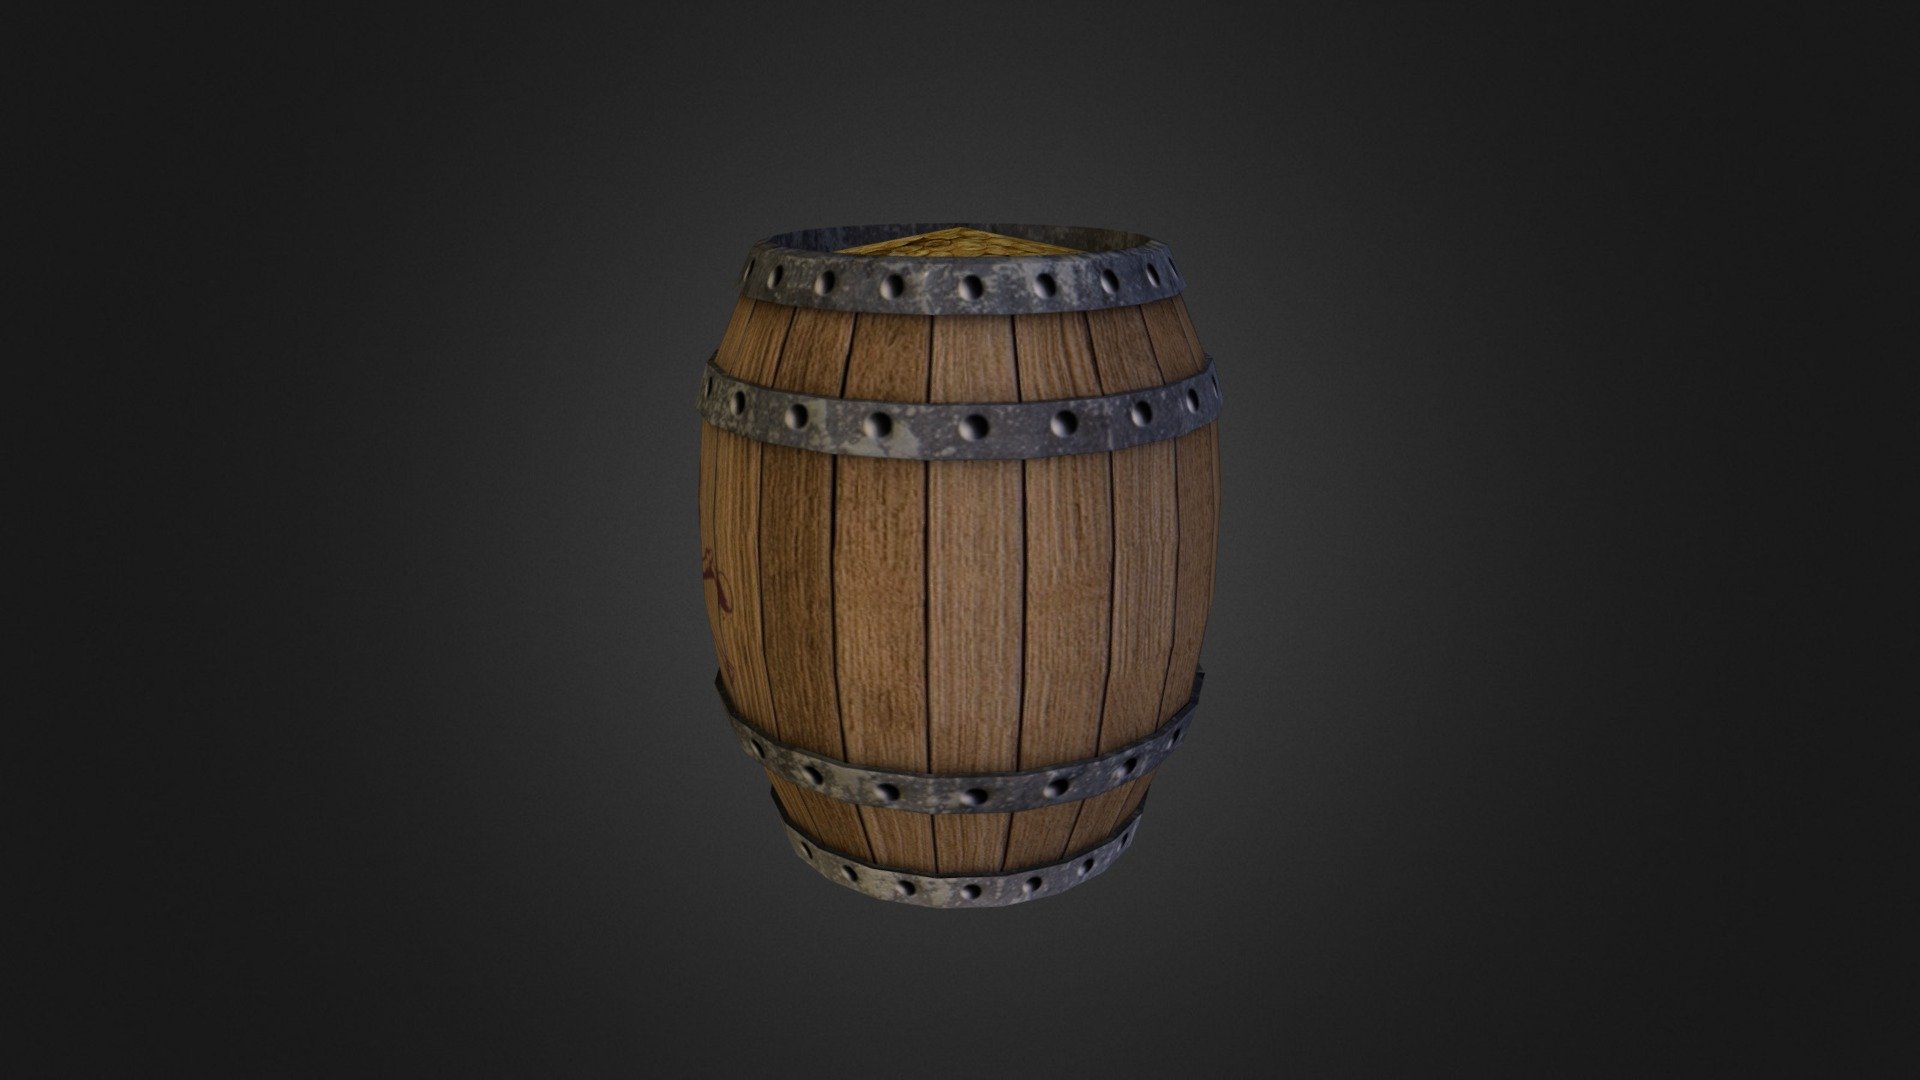 A pirate themed barrel created for class using maya.

Textures used can be found in the comments 3d model